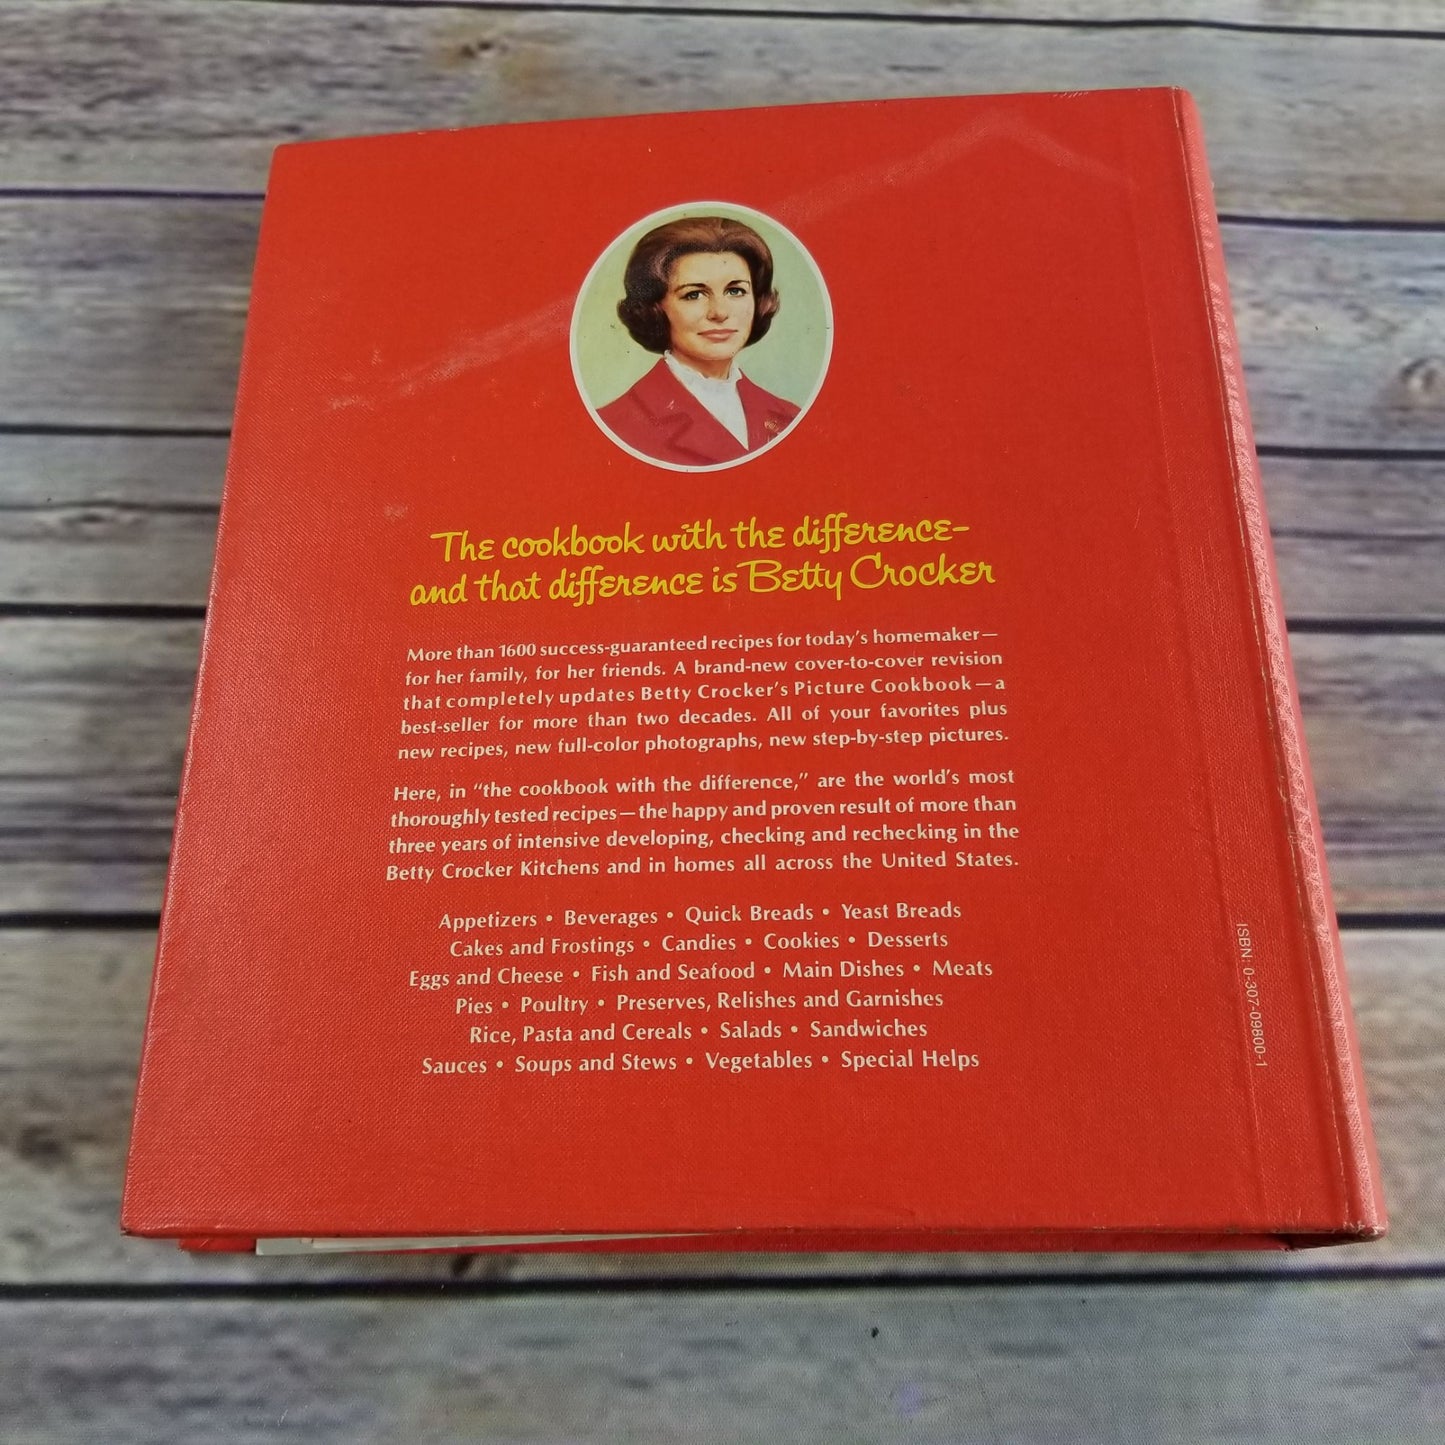 Vintage Cookbook Betty Crocker Red Pie Cover 1970s Printing Recipes Cook Book Hardcover 5 Ring Binder